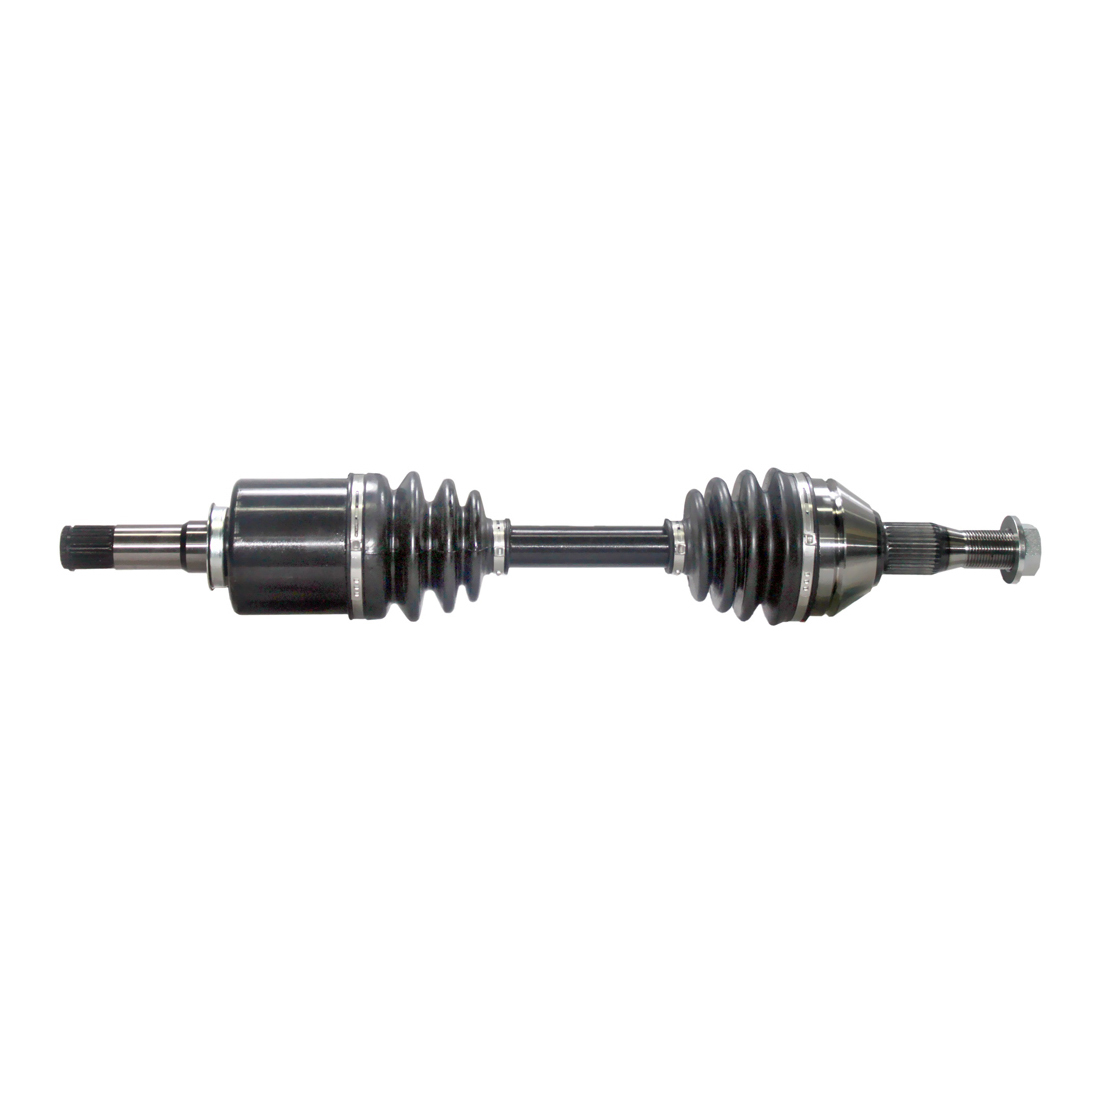 2014 Chevrolet impala limited drive axle front 